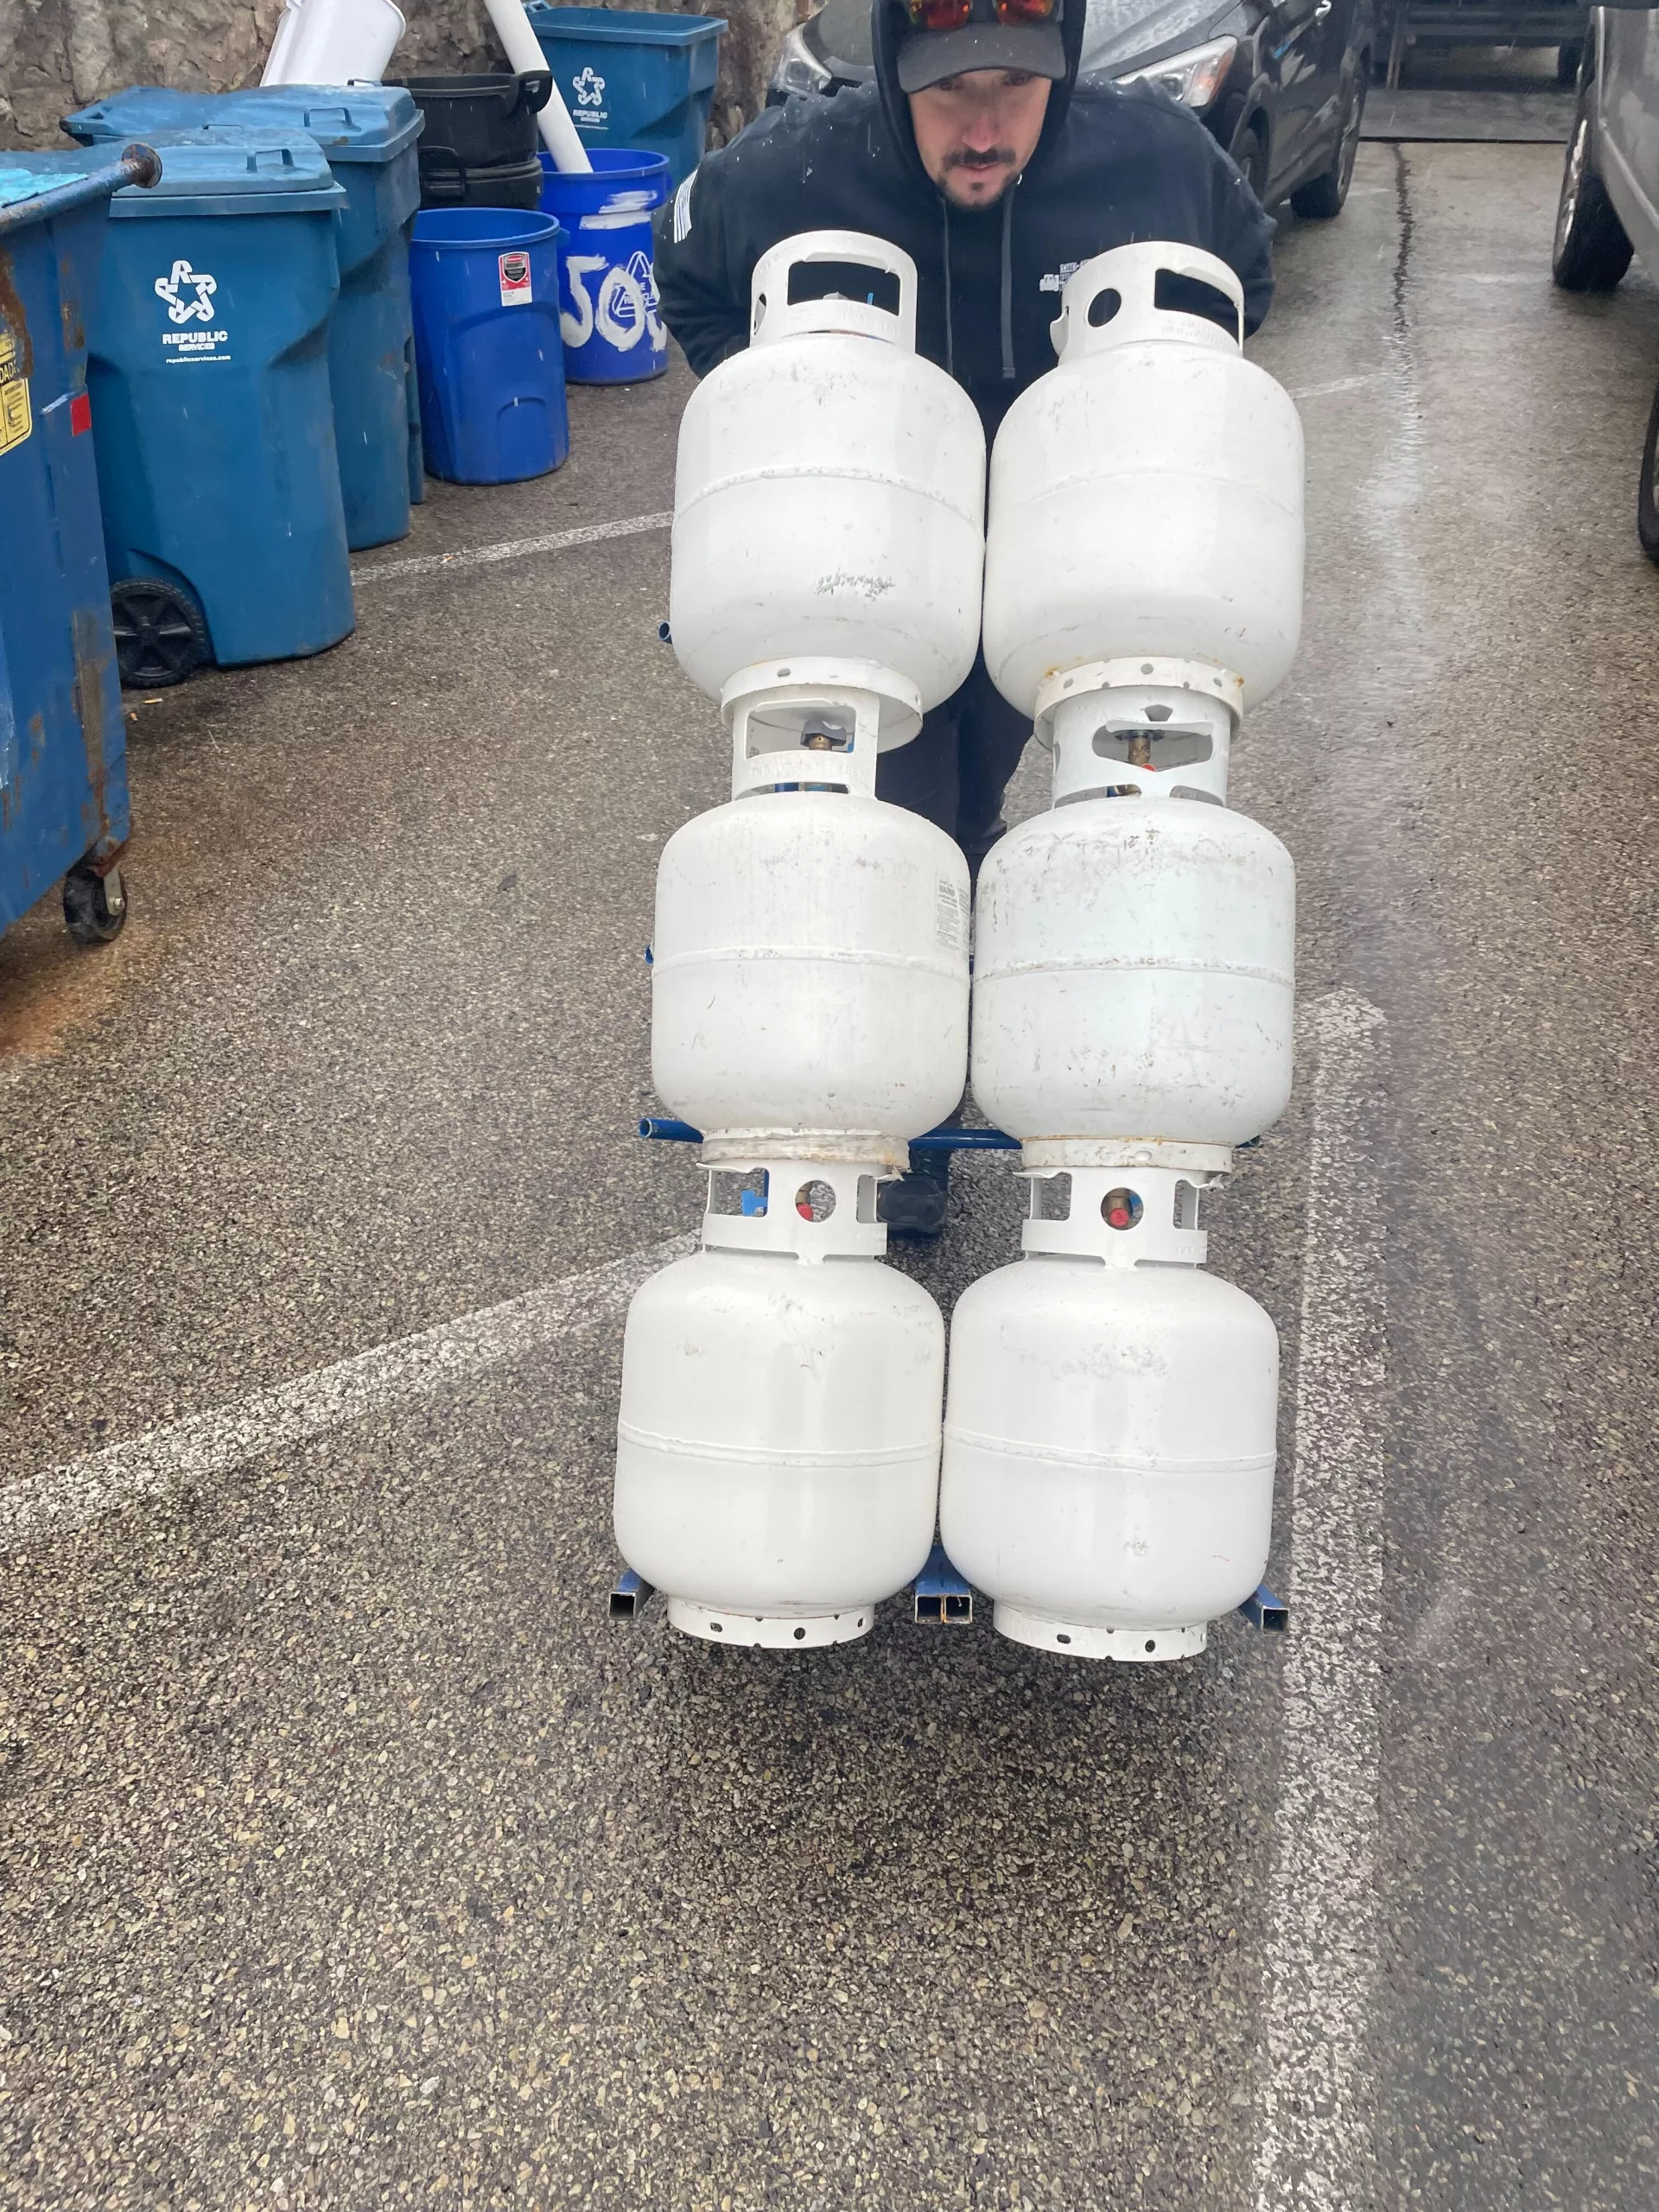 A stack of propane cylinders